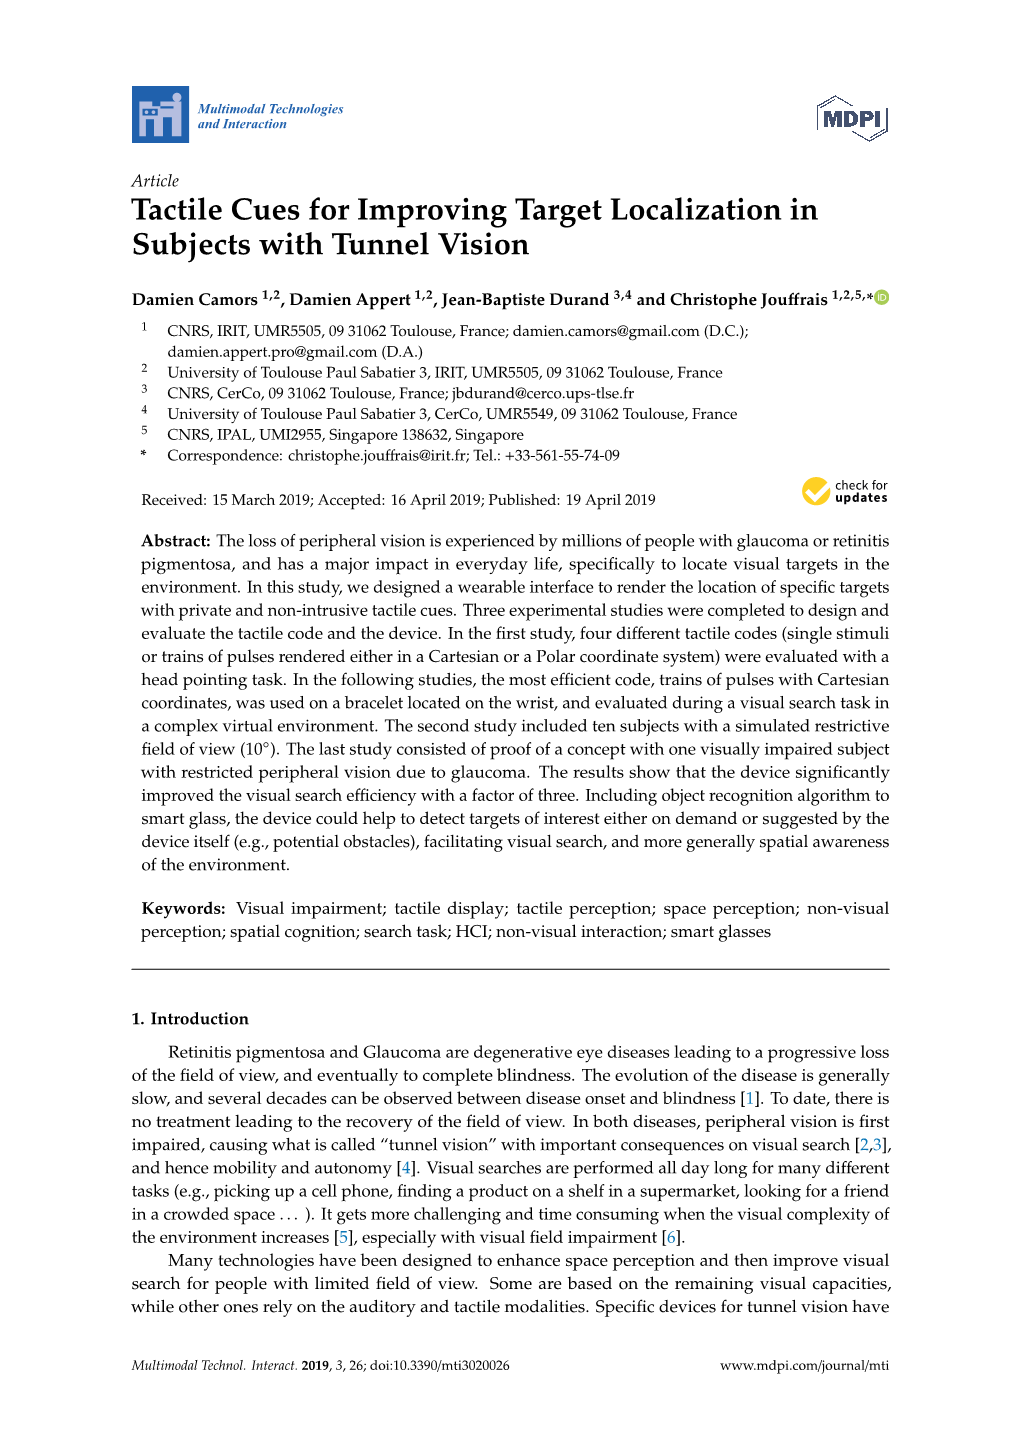 Tactile Cues for Improving Target Localization in Subjects with Tunnel Vision